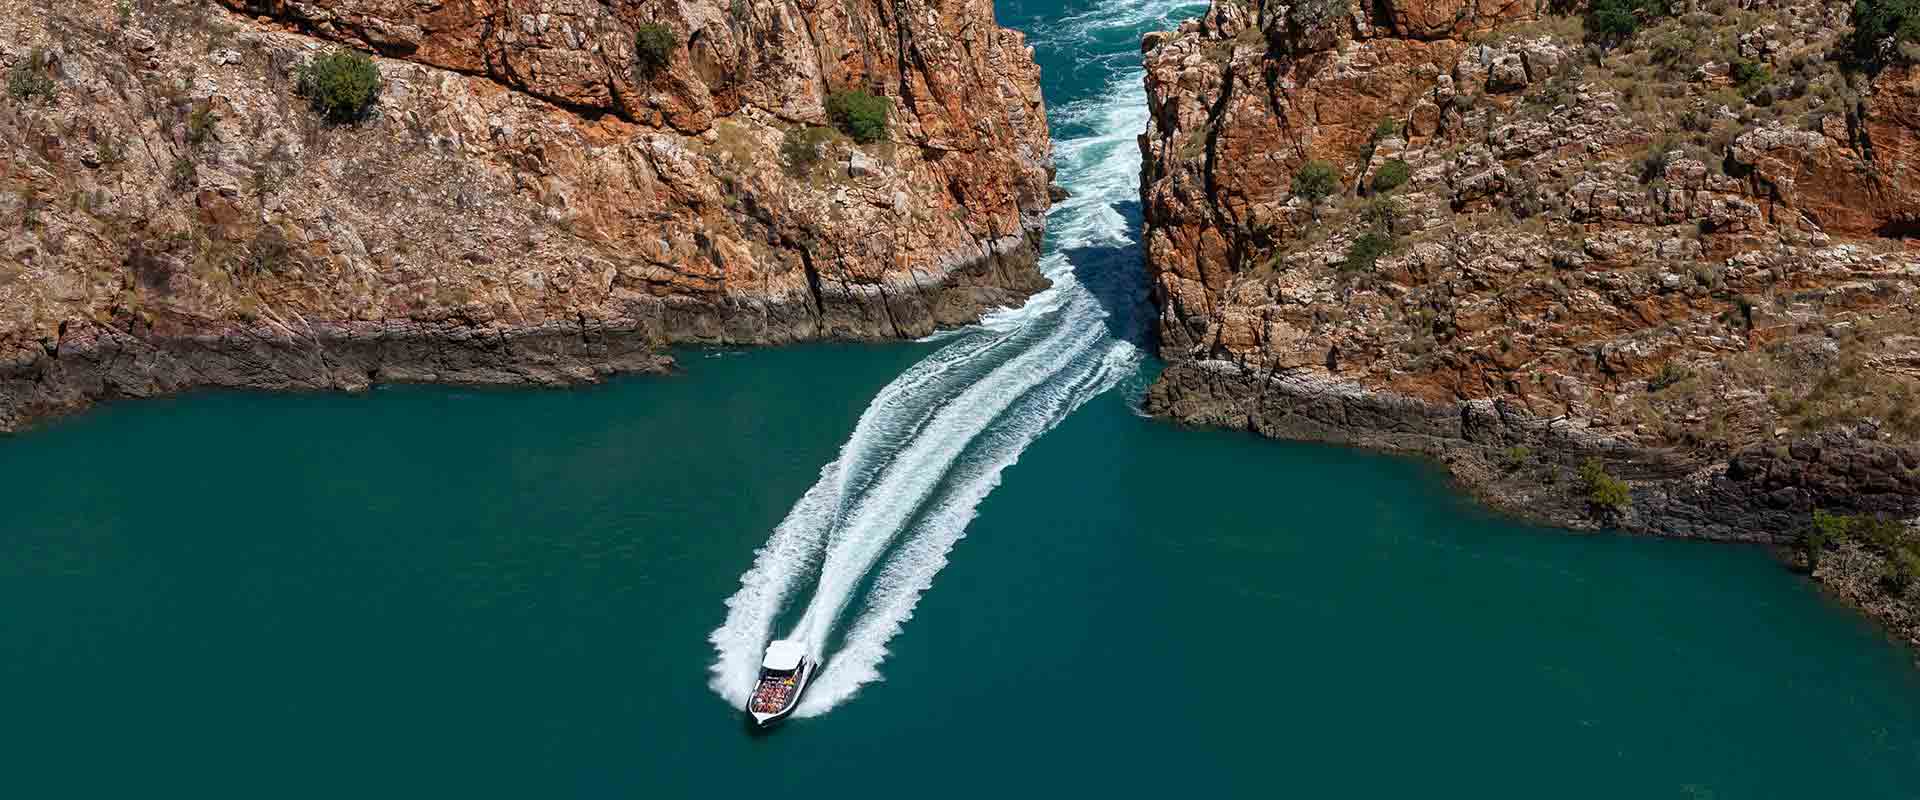 Embark on a high-powered fast boat ride through the Horizontal Falls from on board a Kimberley Coast small ship expedition cruise 